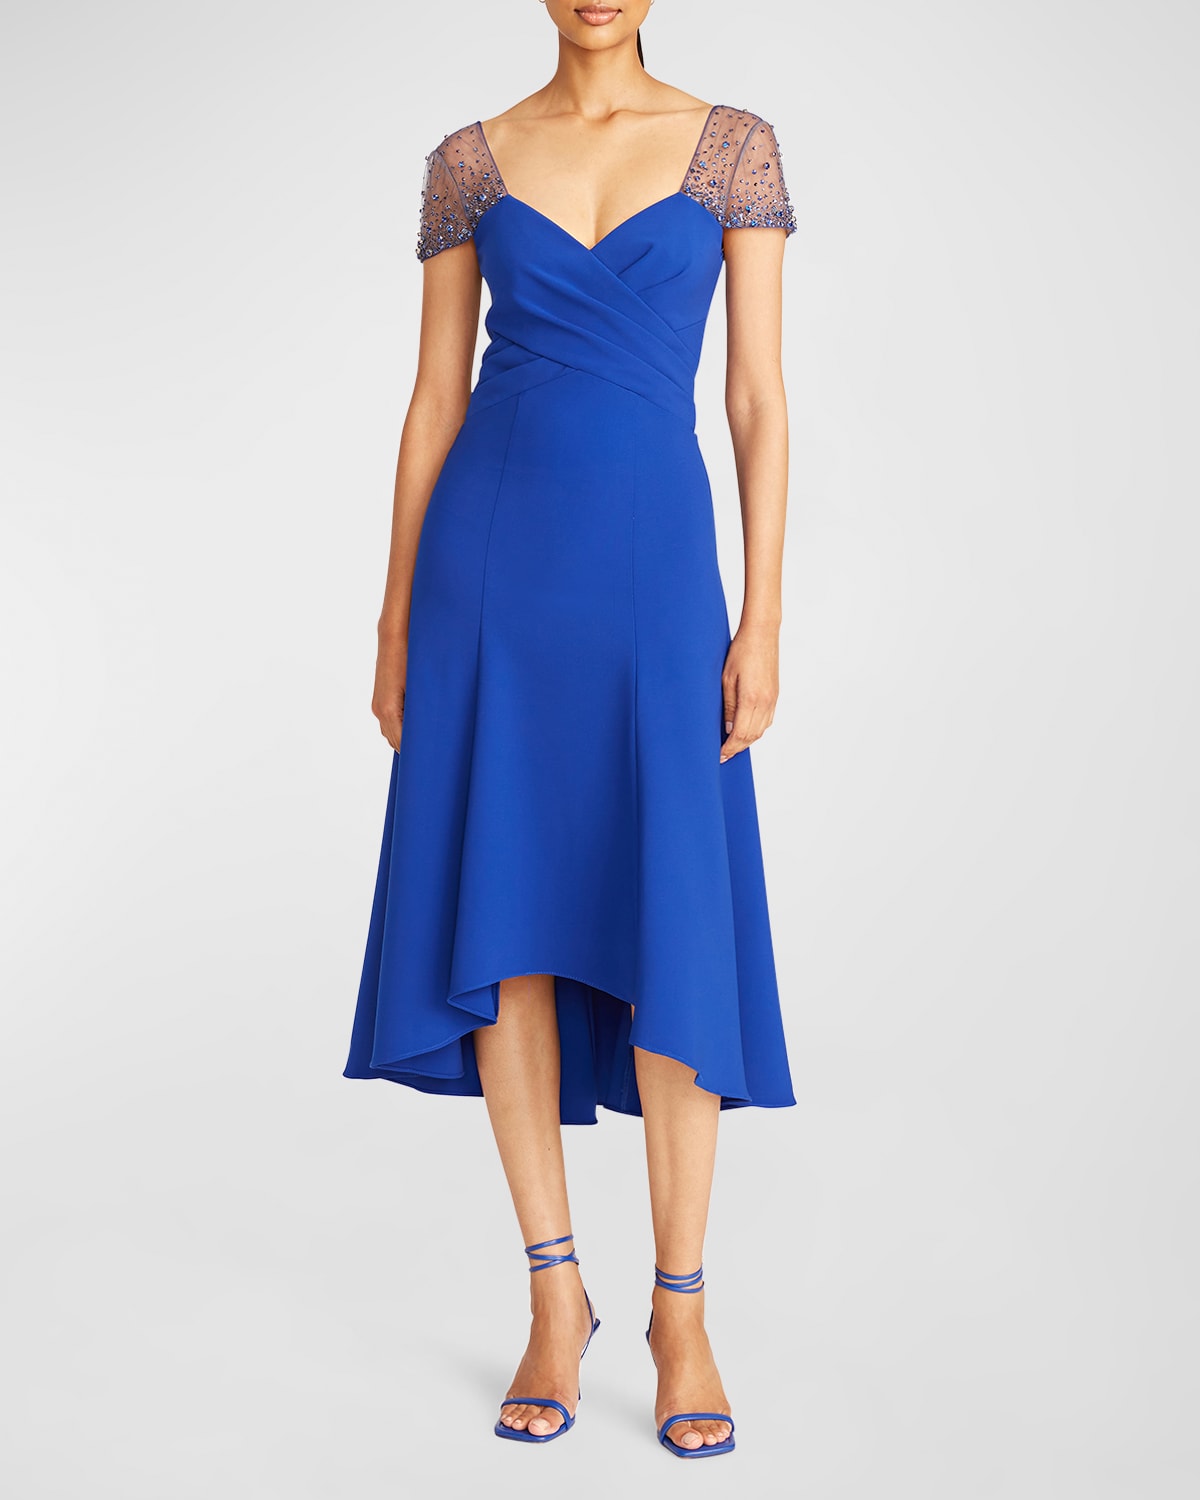 THEIA ANETTE BEADED HIGH-LOW COCKTAIL DRESS